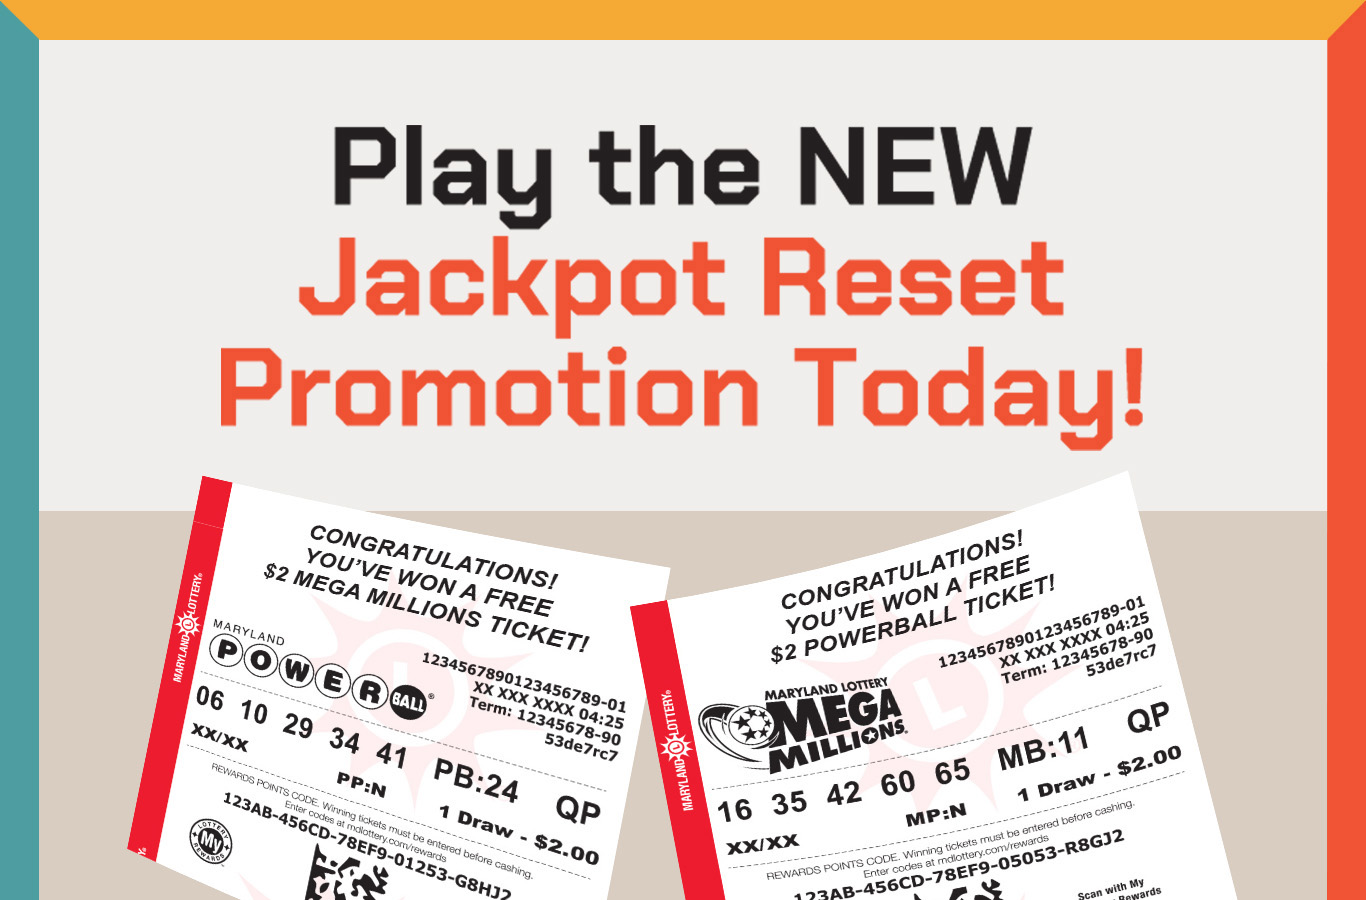 The NEW Jackpot Reset Promotion means it’s always a good time to play! Learn more about how you could randomly win a free $2 jackpot game!